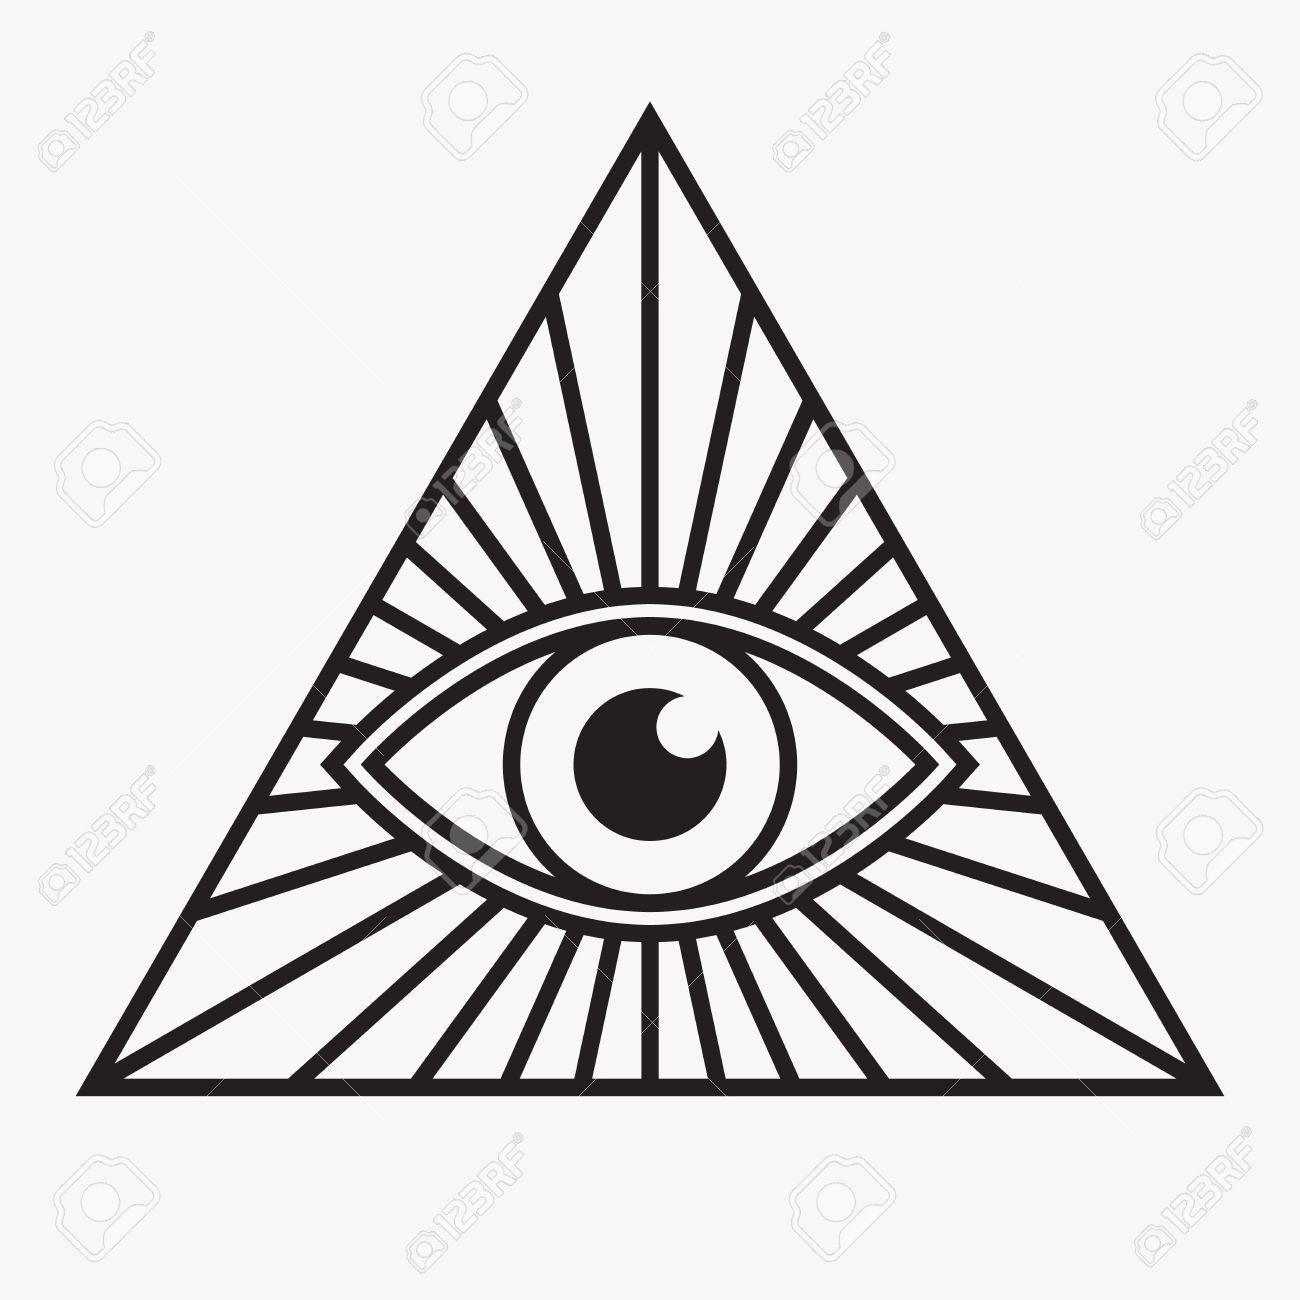 Black and White Triangle with Eye Logo - All seeing eye symbol, vector illustration. Patterns for WCIP